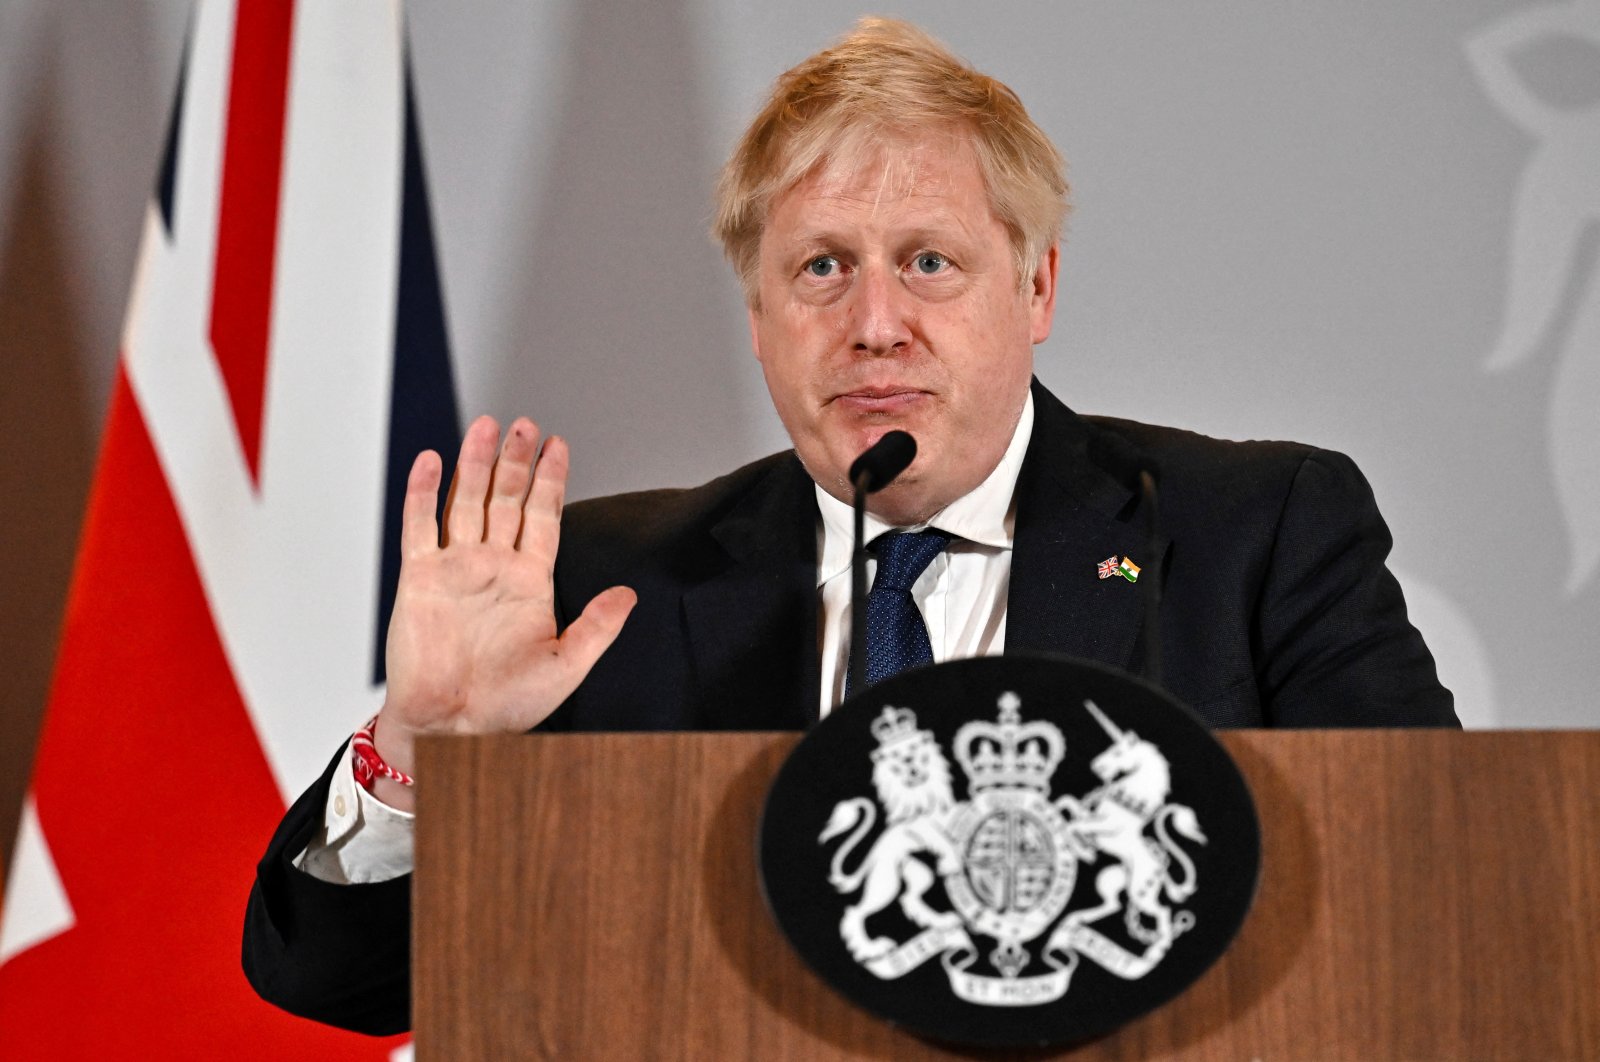 British Prime Minister Boris Johnson gestures as he speaks during a news conference in New Delhi, India, April 22, 2022. (Reuters Photo)